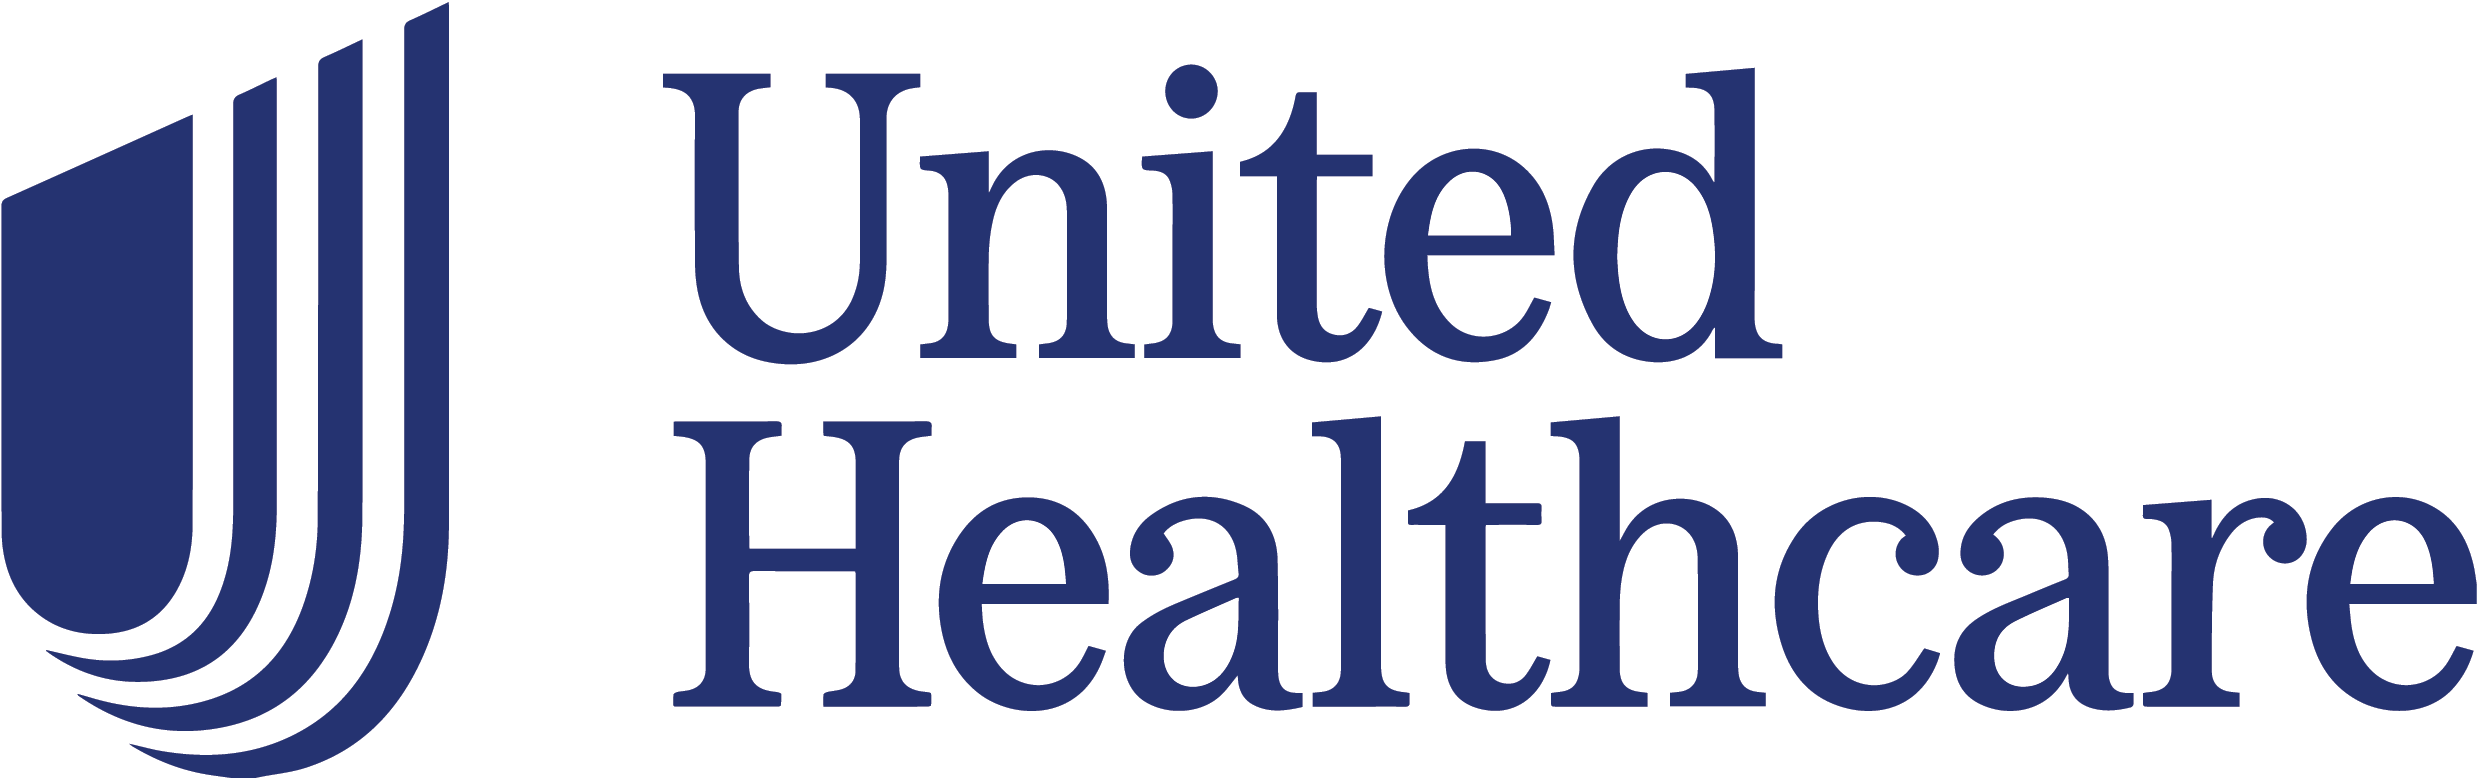 United Healthcare The Villages Polo Club Sponsor